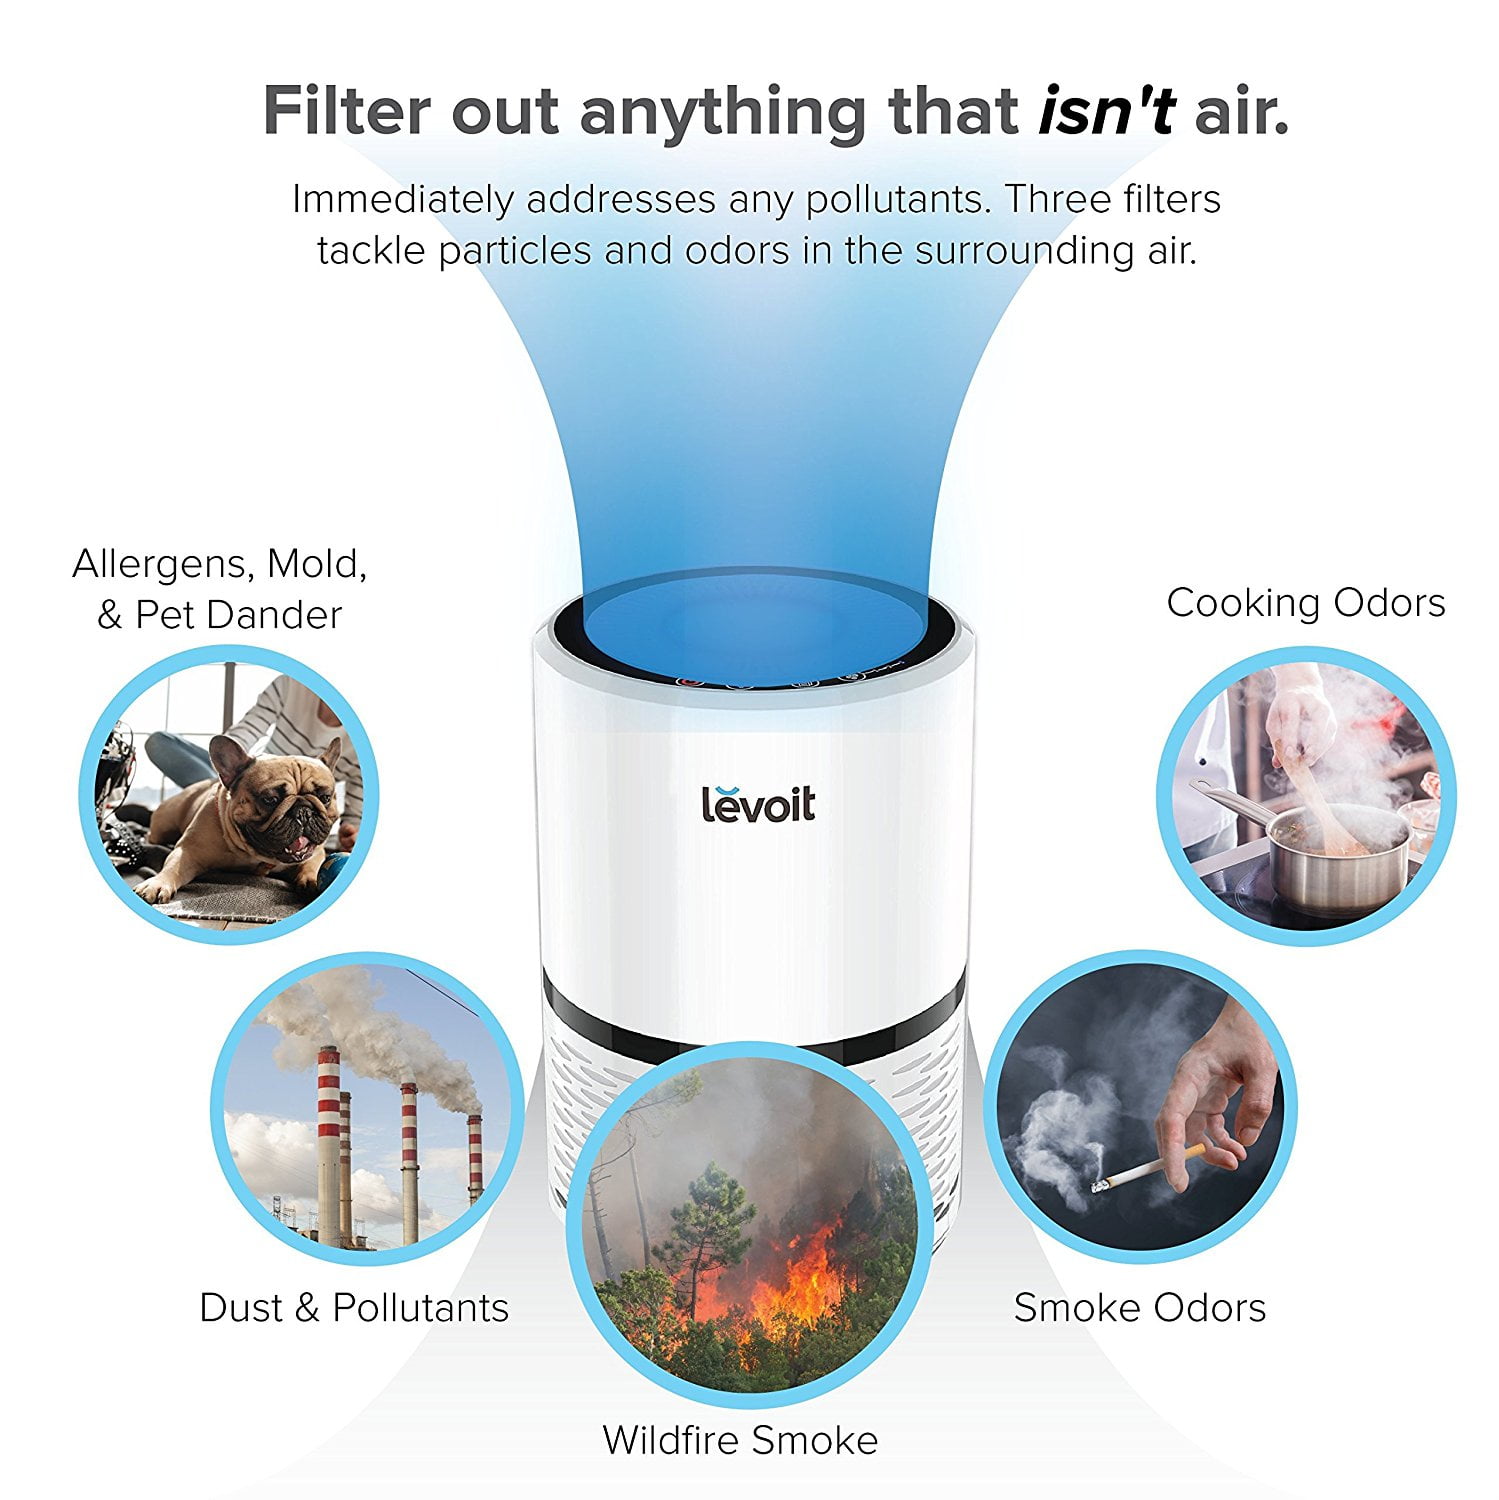 Levoit LV-H132 Air Purifier Cleaner True HEPA Filter Included